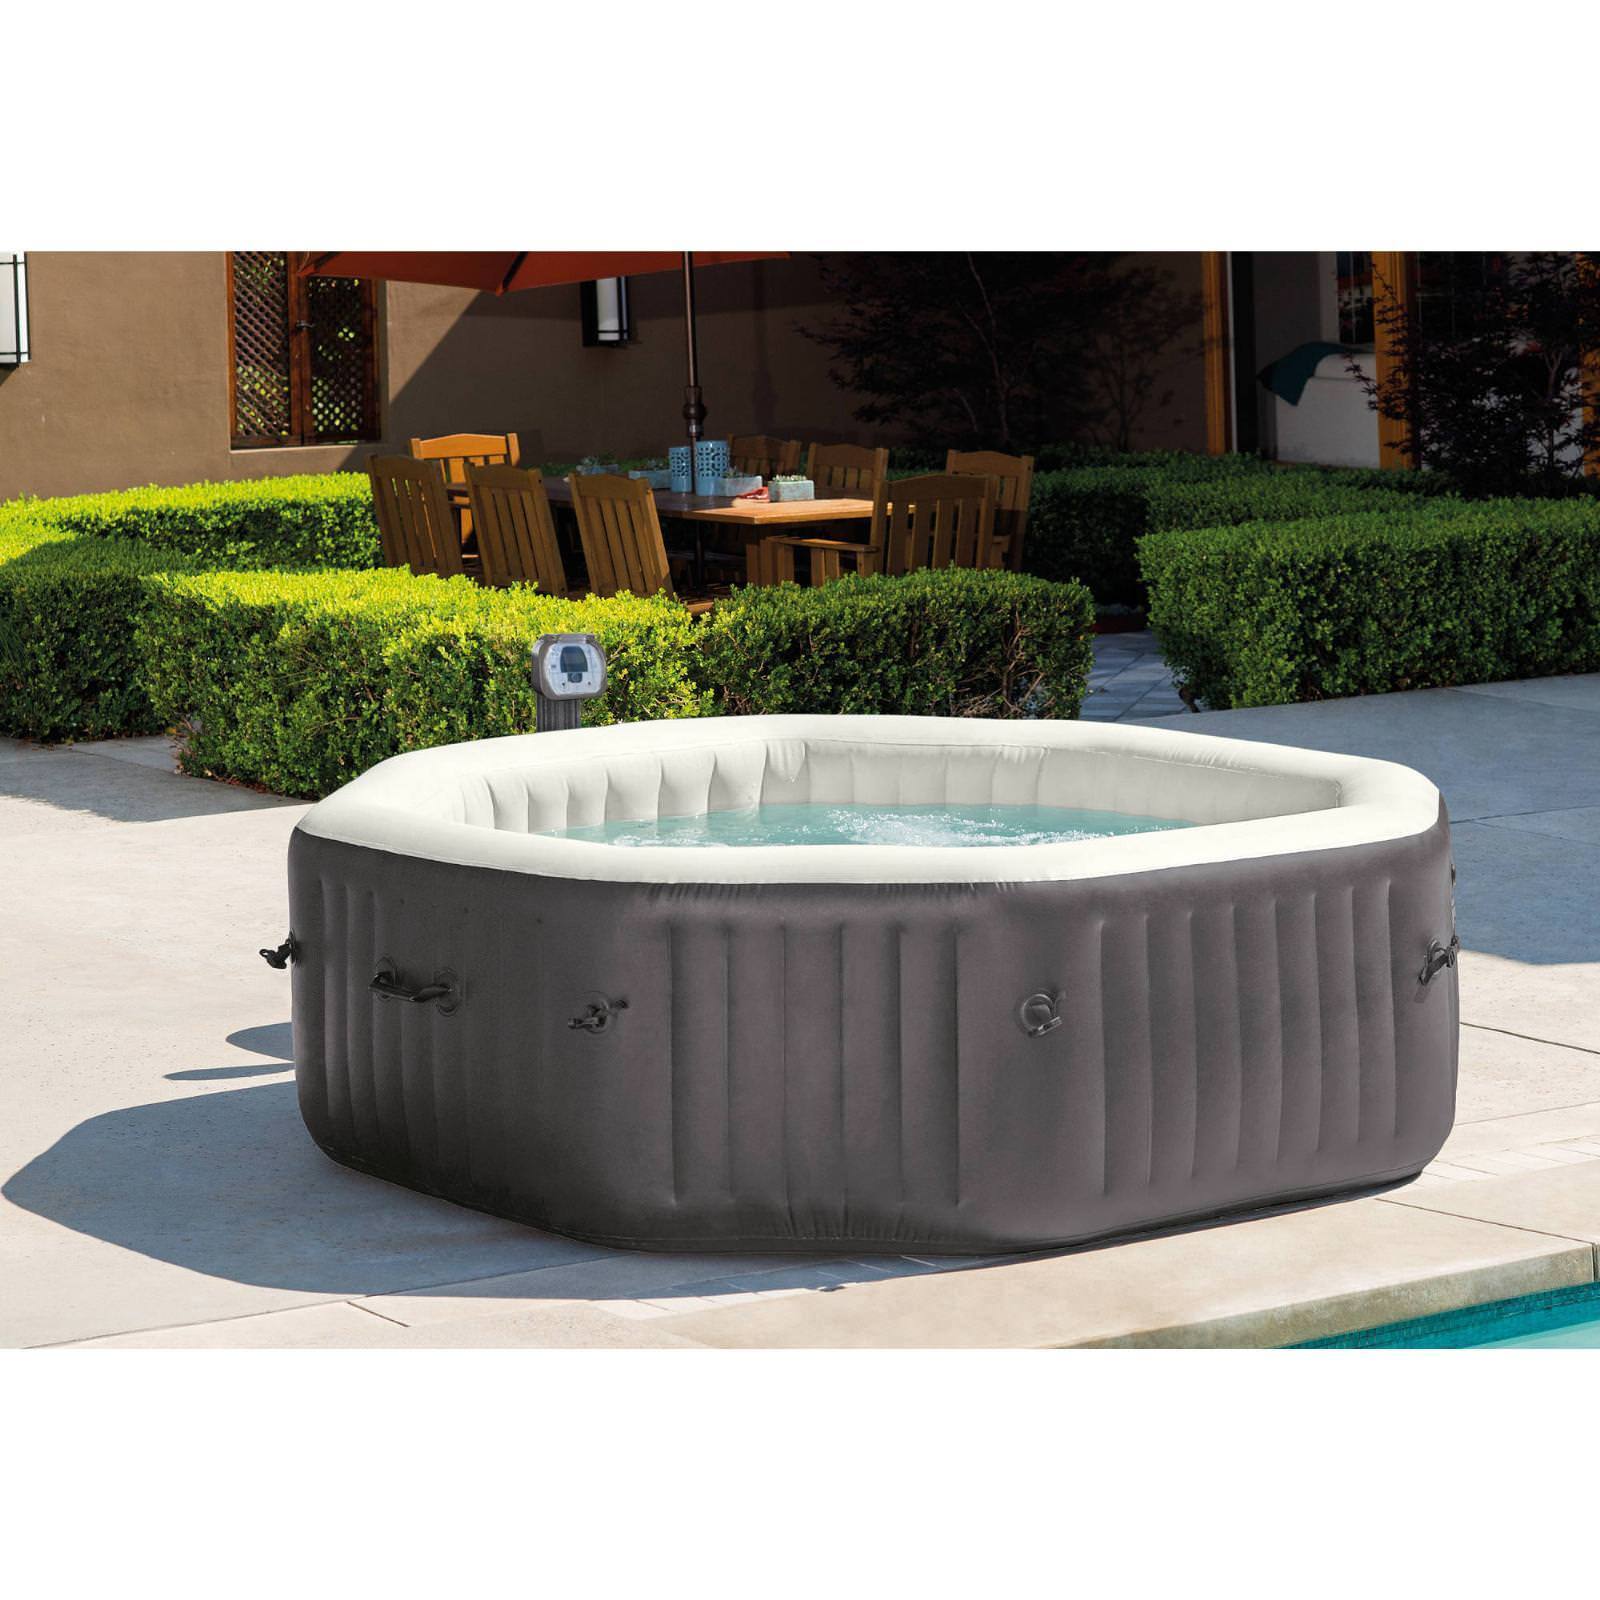 Intex 6 Person Octagonal Portable Inflatable Hot Tub Spa Patio Garden Furniture For Sale From